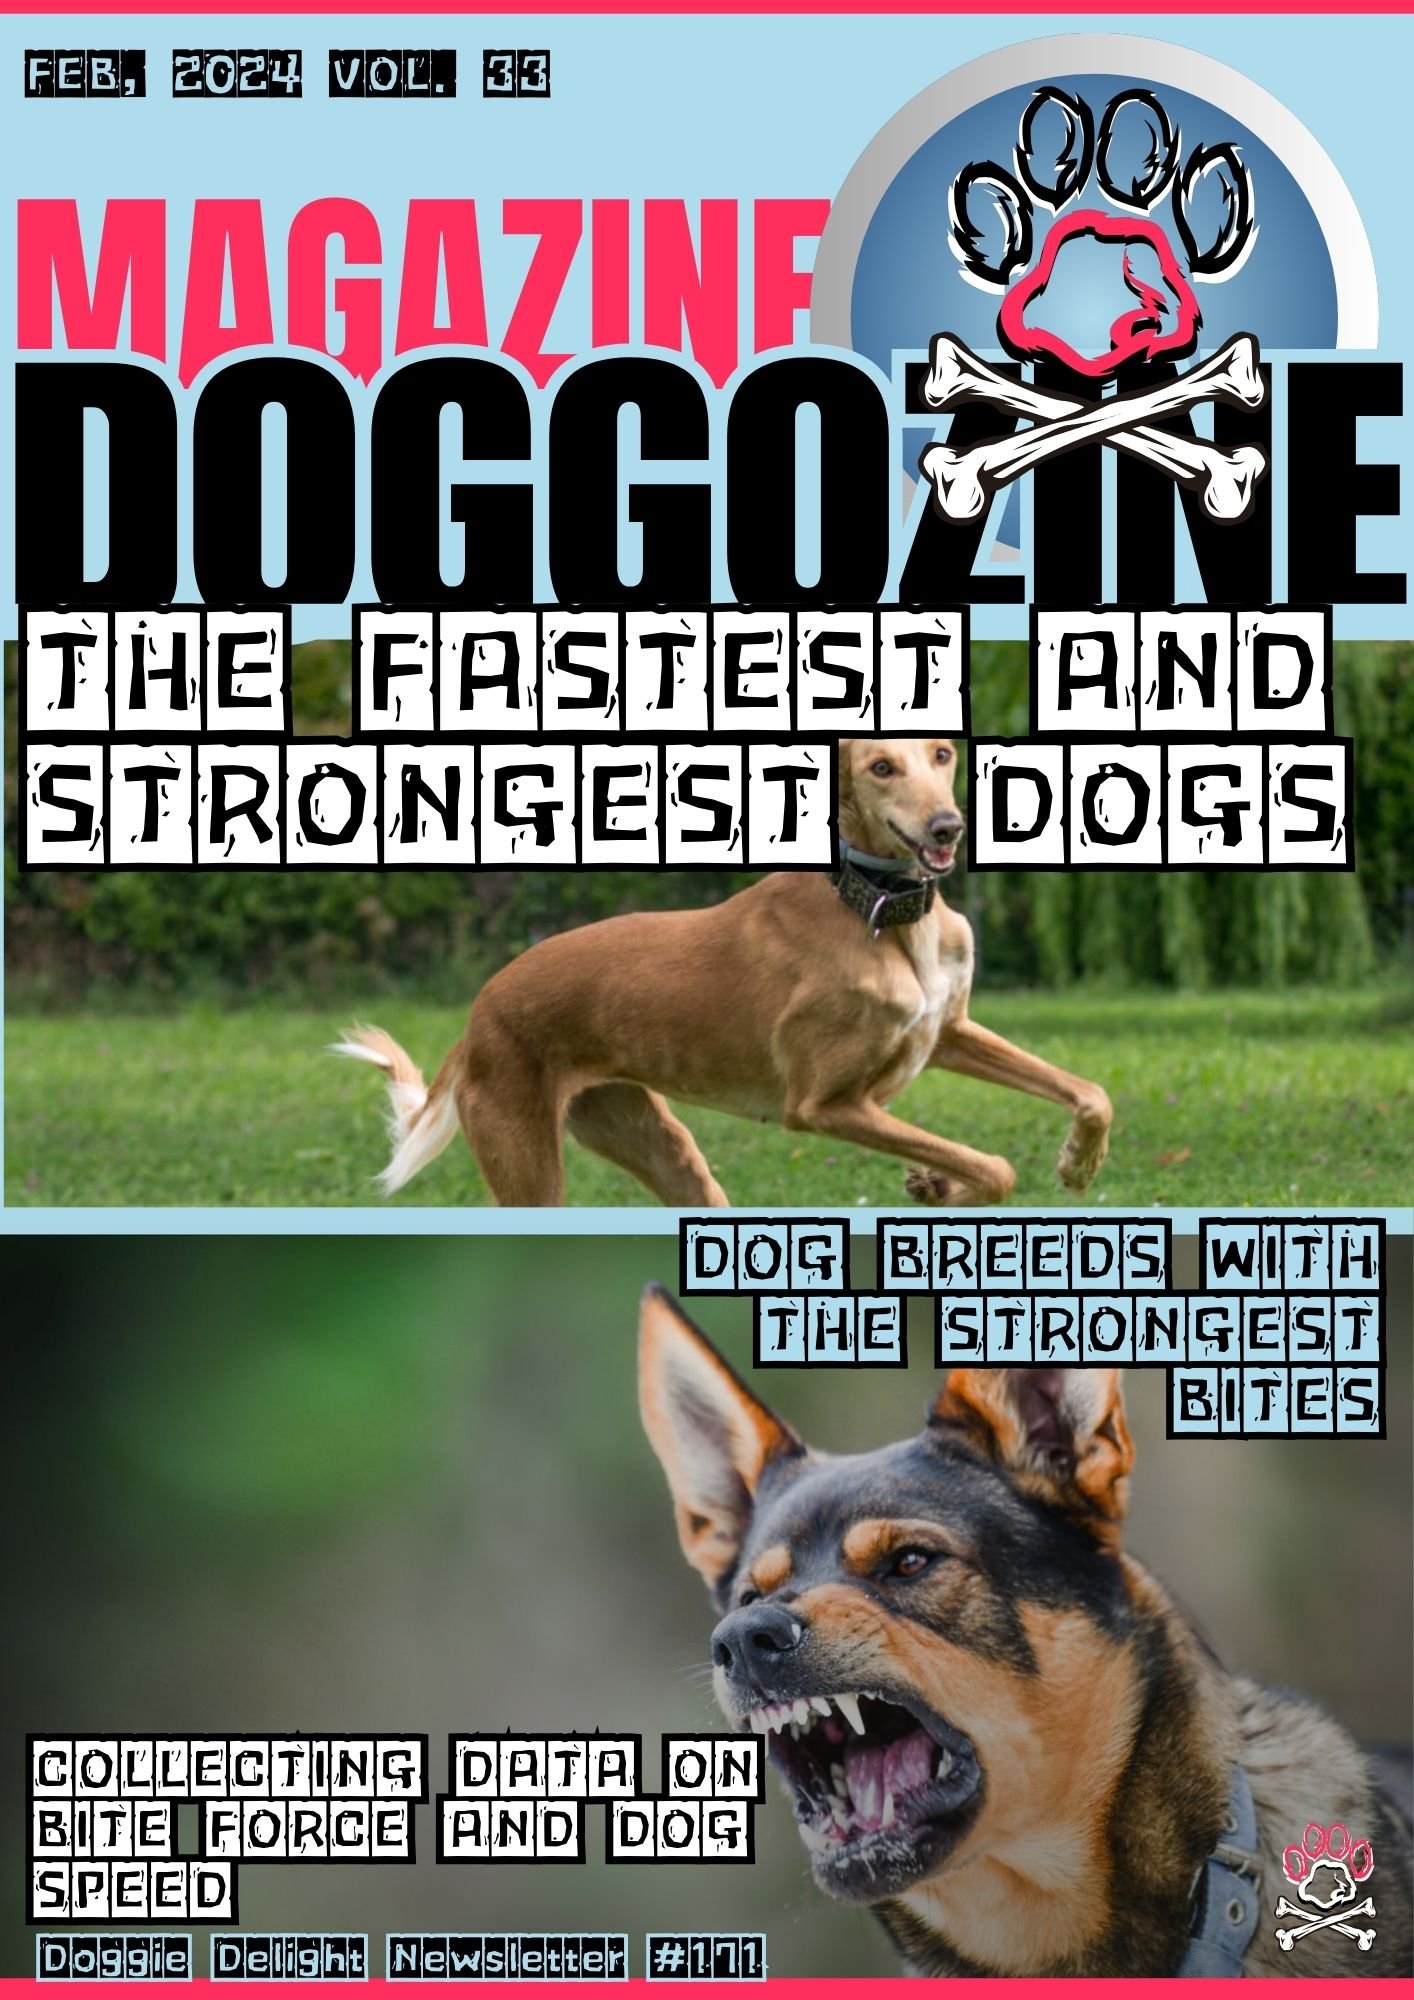 Fastest and strongest dogs in the world